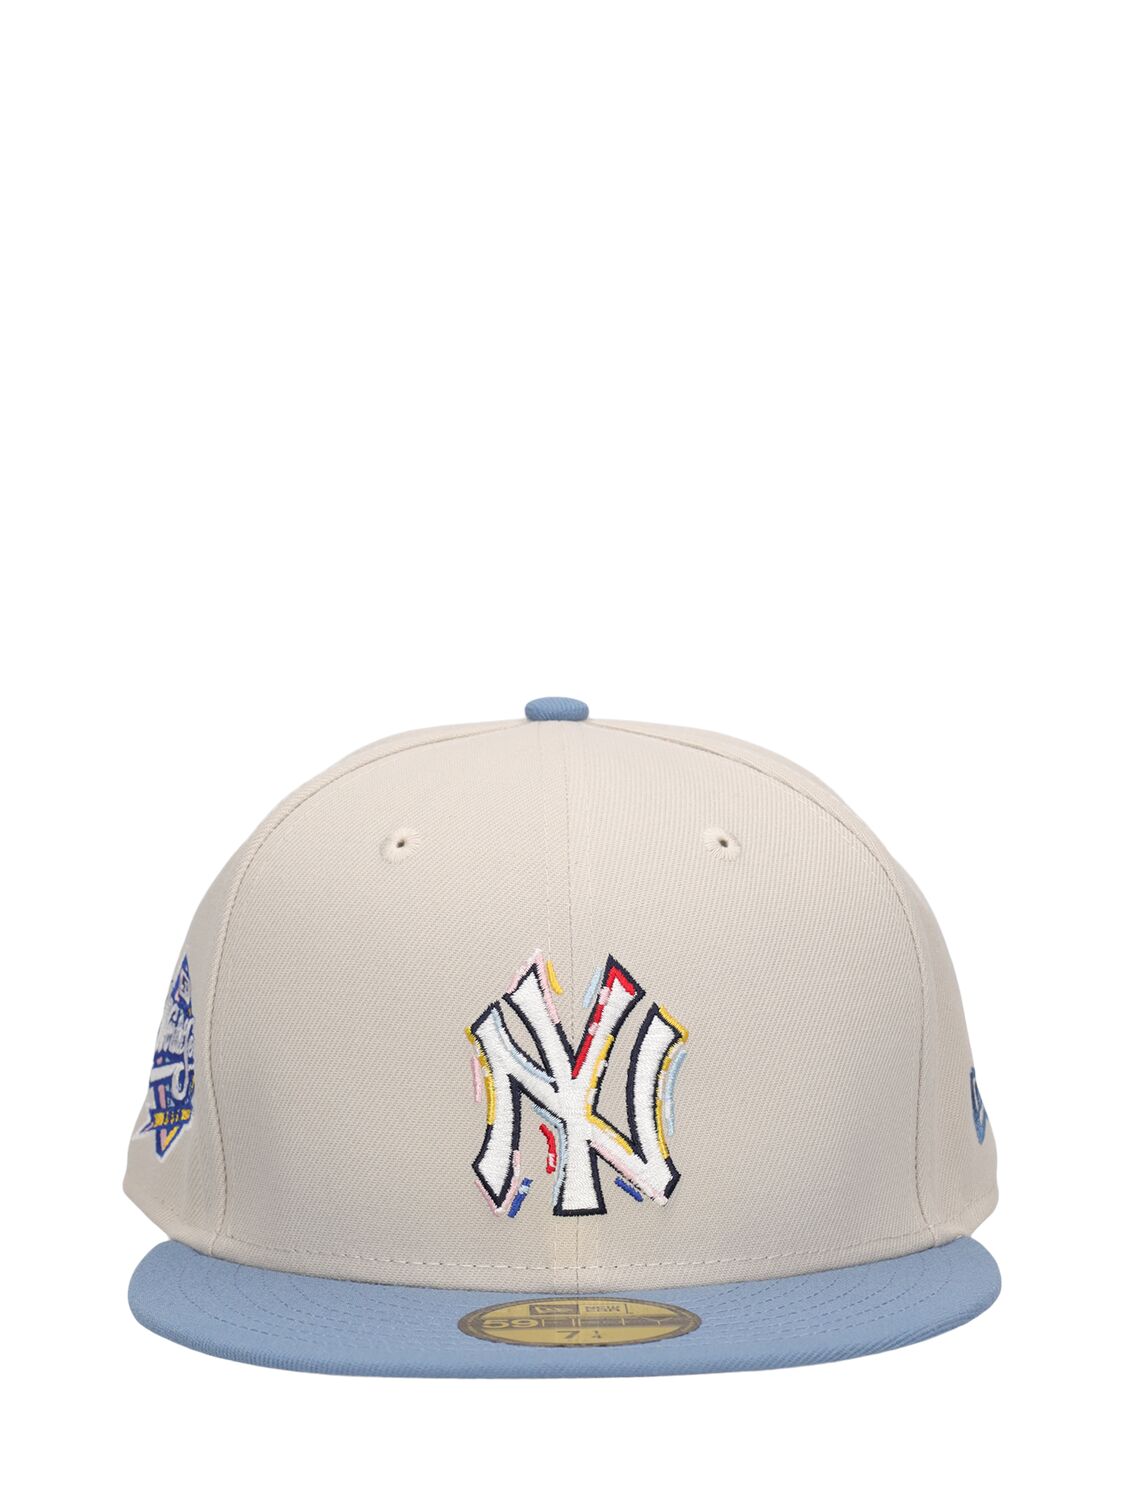 Image of Color Brush Ny Yankees 59fifty Cap